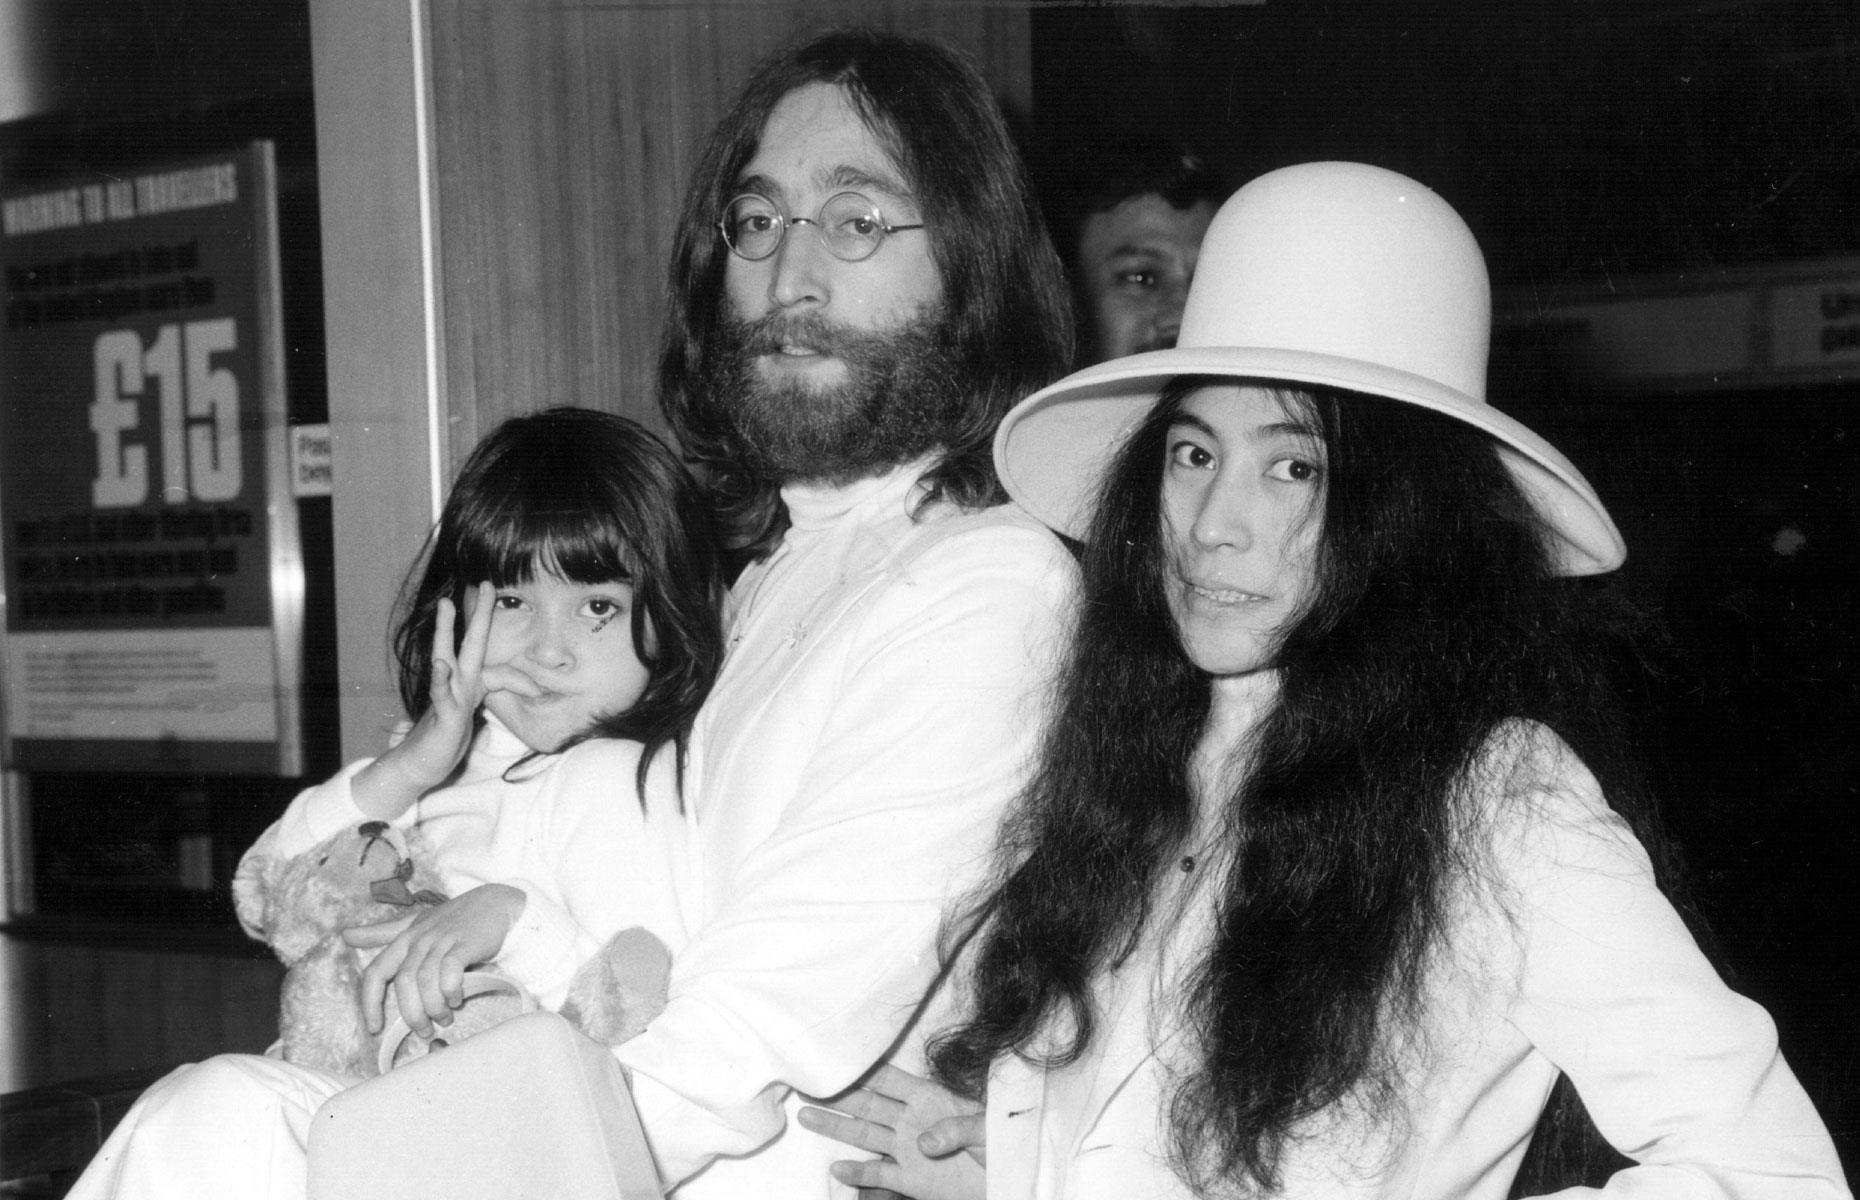 <p>John Lennon's stepdaughter Kyoko Chan Cox was born to his second wife Yoko Ono and her second husband, Anthony Cox, in 1963.</p>  <p>Shockingly Yoko lost custody of her daughter when she was just eight years old, and Kyoko vanished with her father to join a cult called Church of the Living Word.</p>  <p>Yoko and her daughter weren't reunited until 1994, when Kyoko was 31.</p>